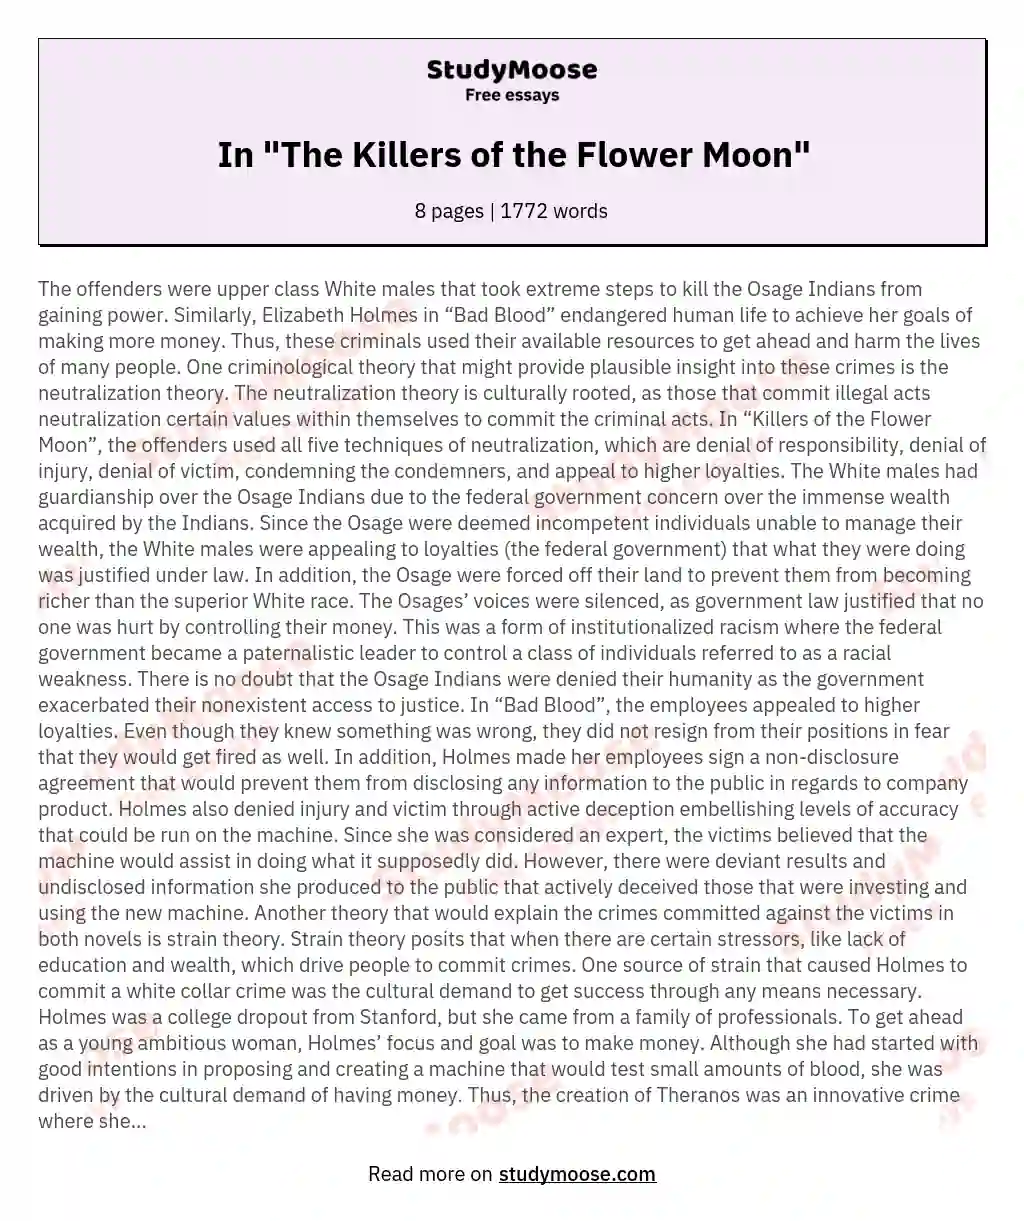 In "The Killers of the Flower Moon" essay